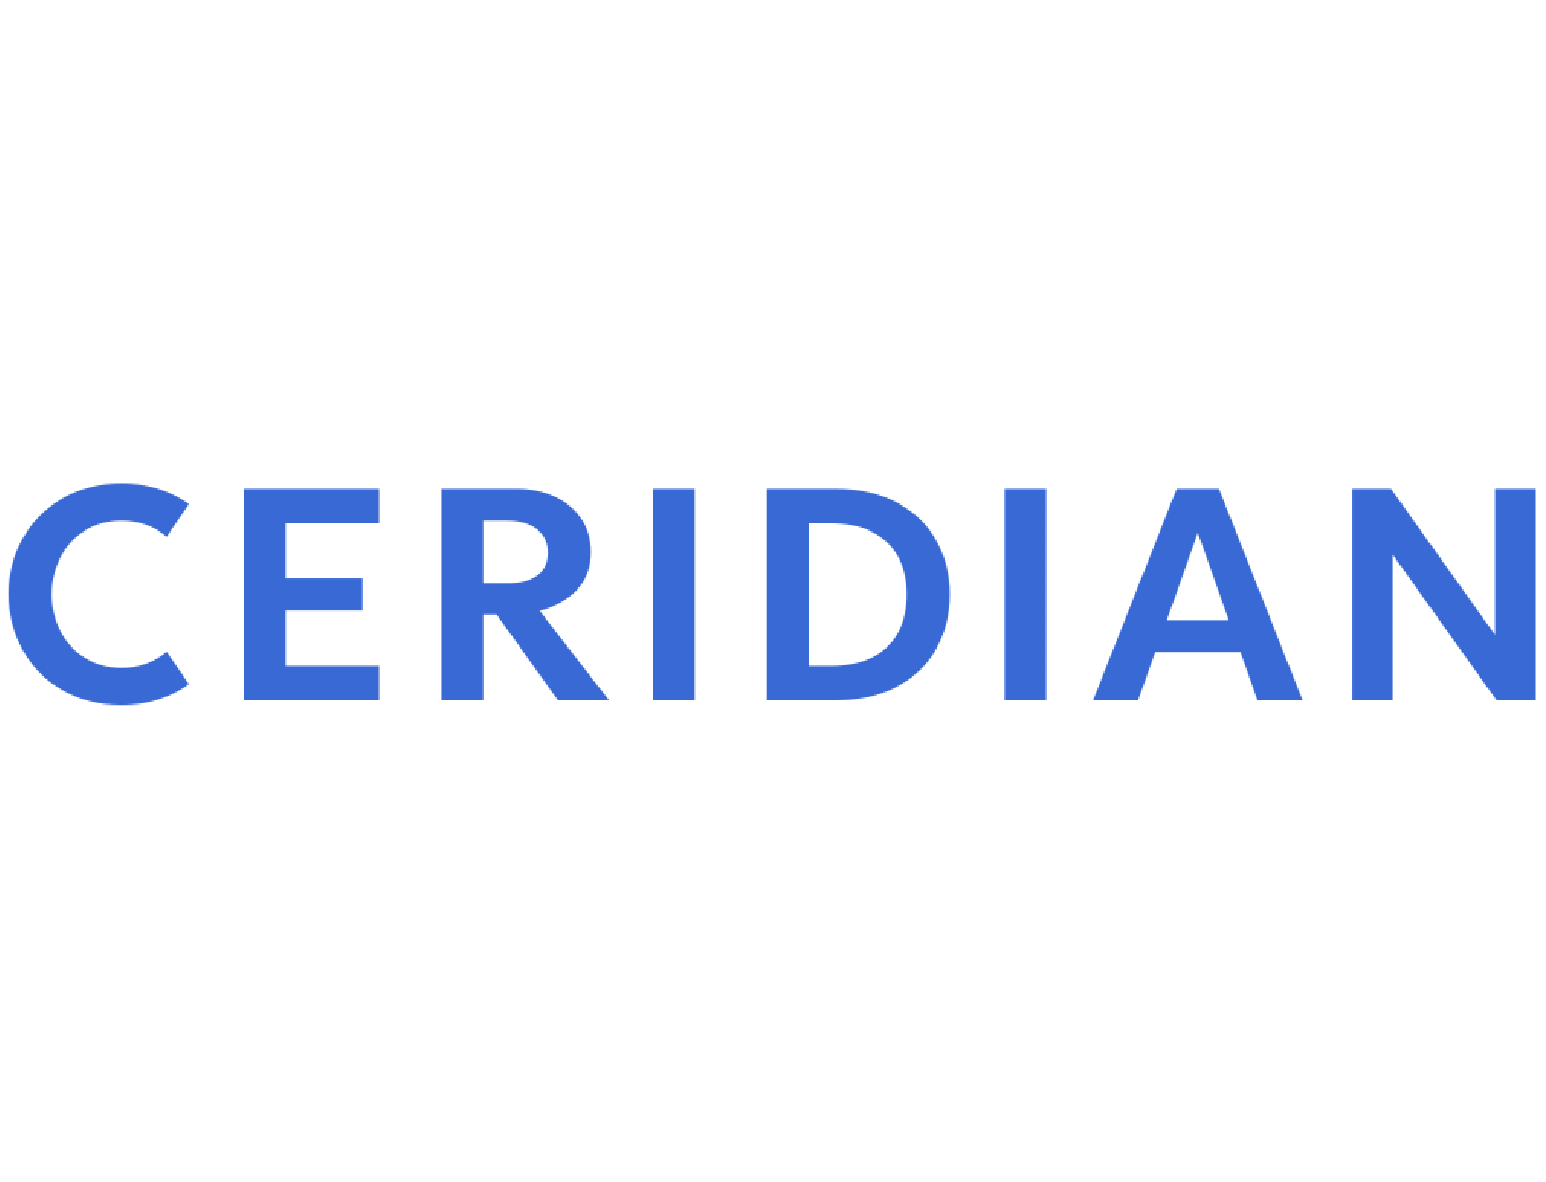 Ceridian | Small and Mid-sized Business Payroll